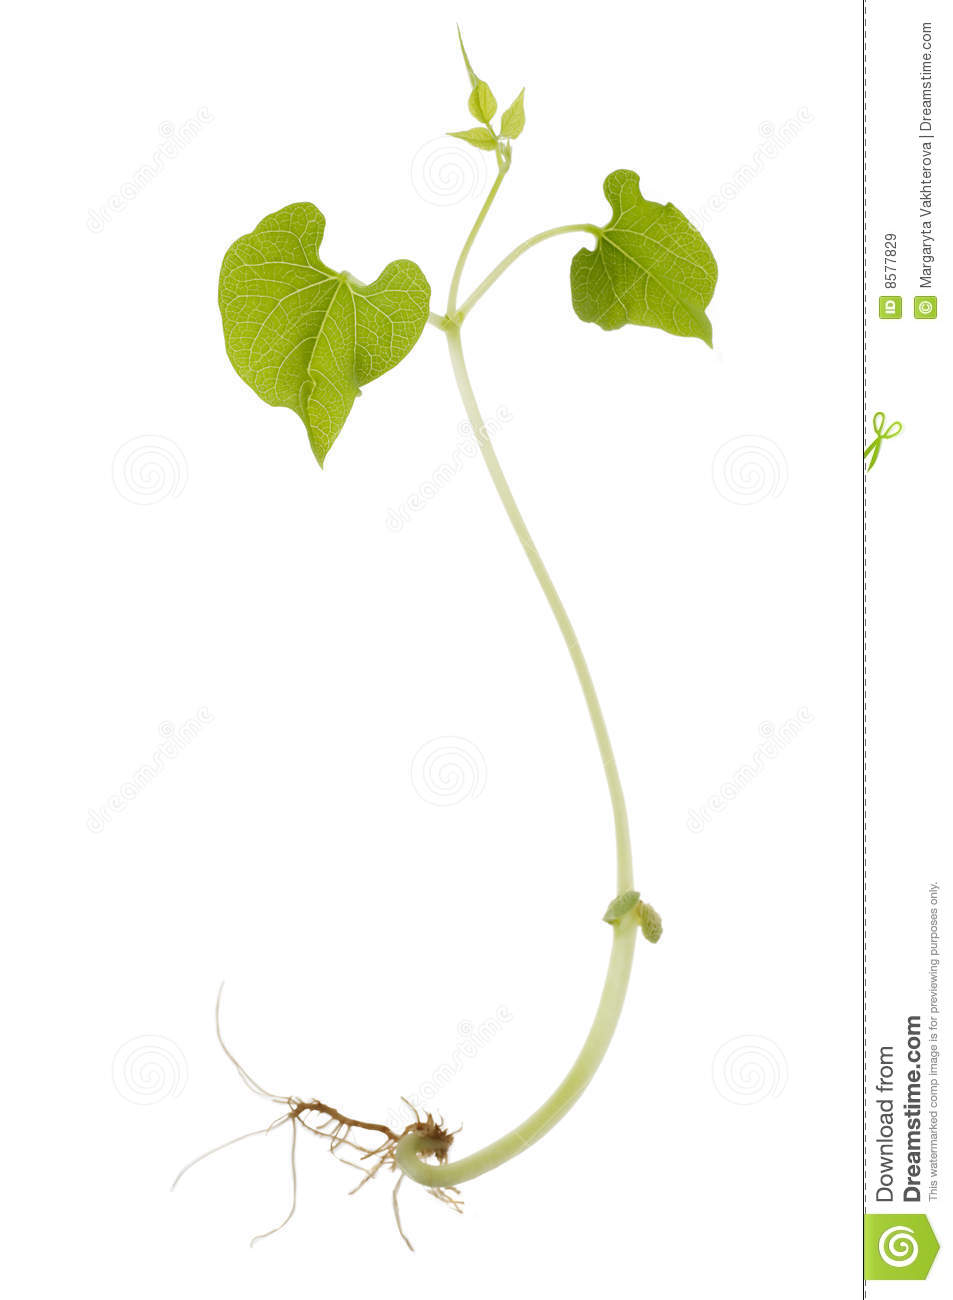 Bean Sprout Royalty Free Stock Images   Image  8577829